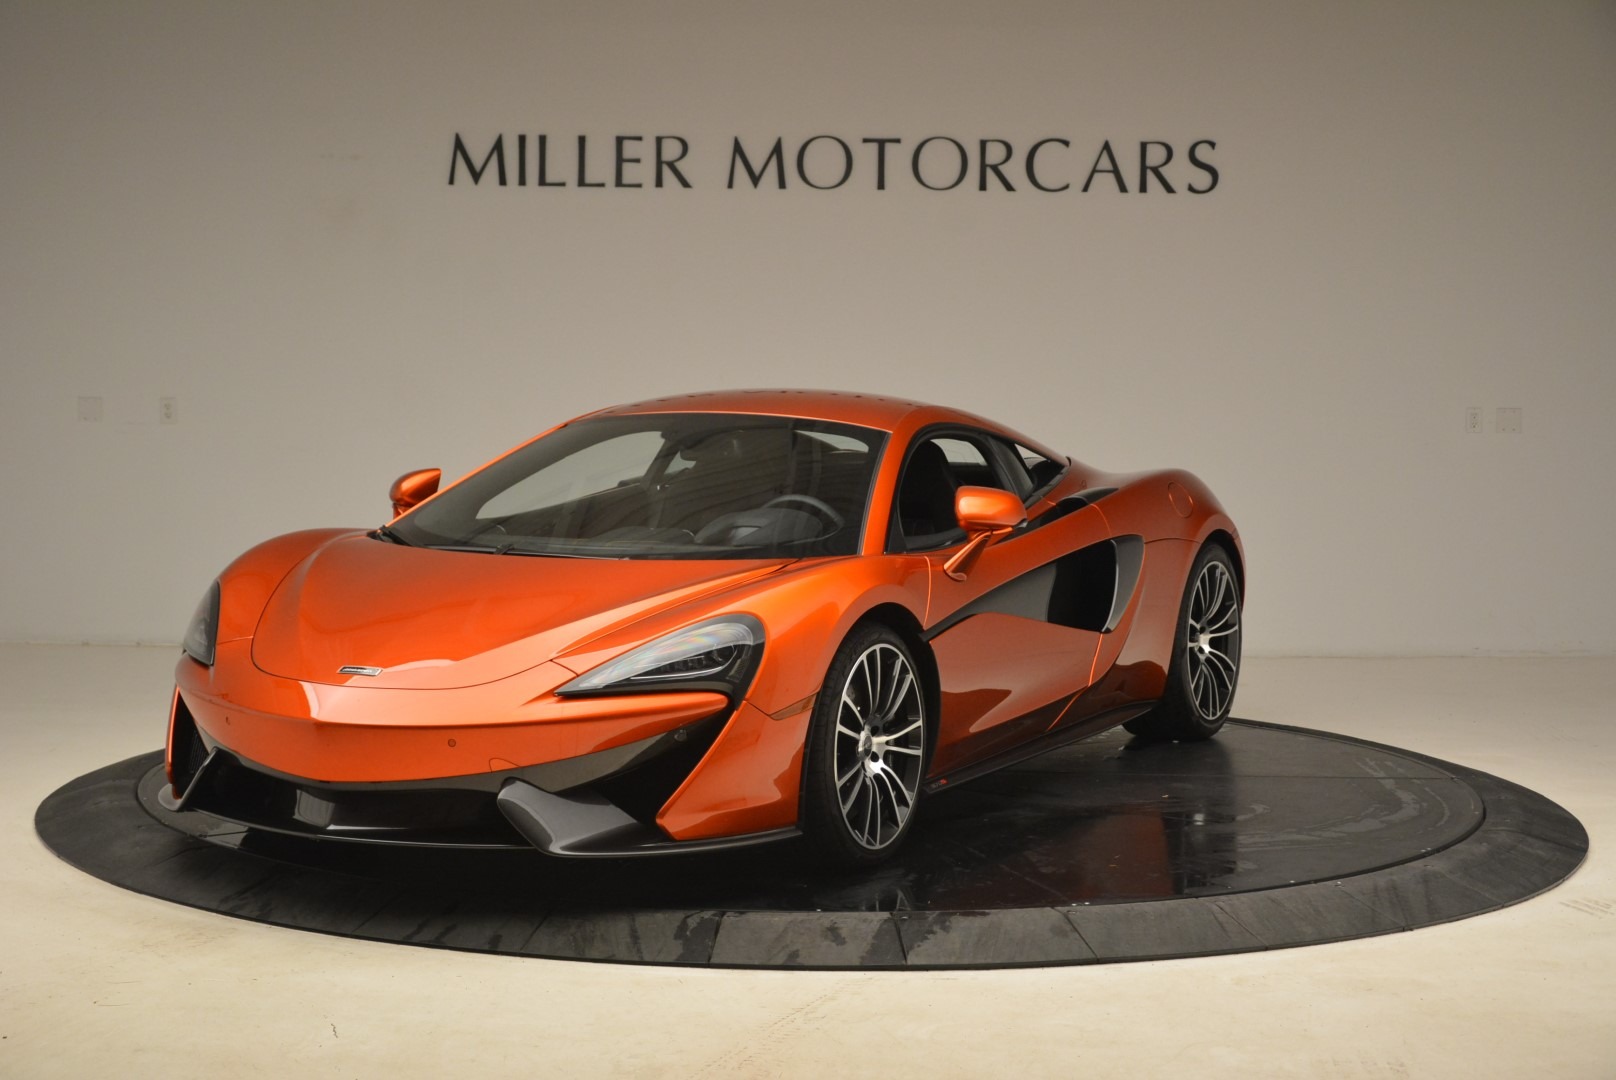 Used 2016 McLaren 570S for sale Sold at Alfa Romeo of Greenwich in Greenwich CT 06830 1